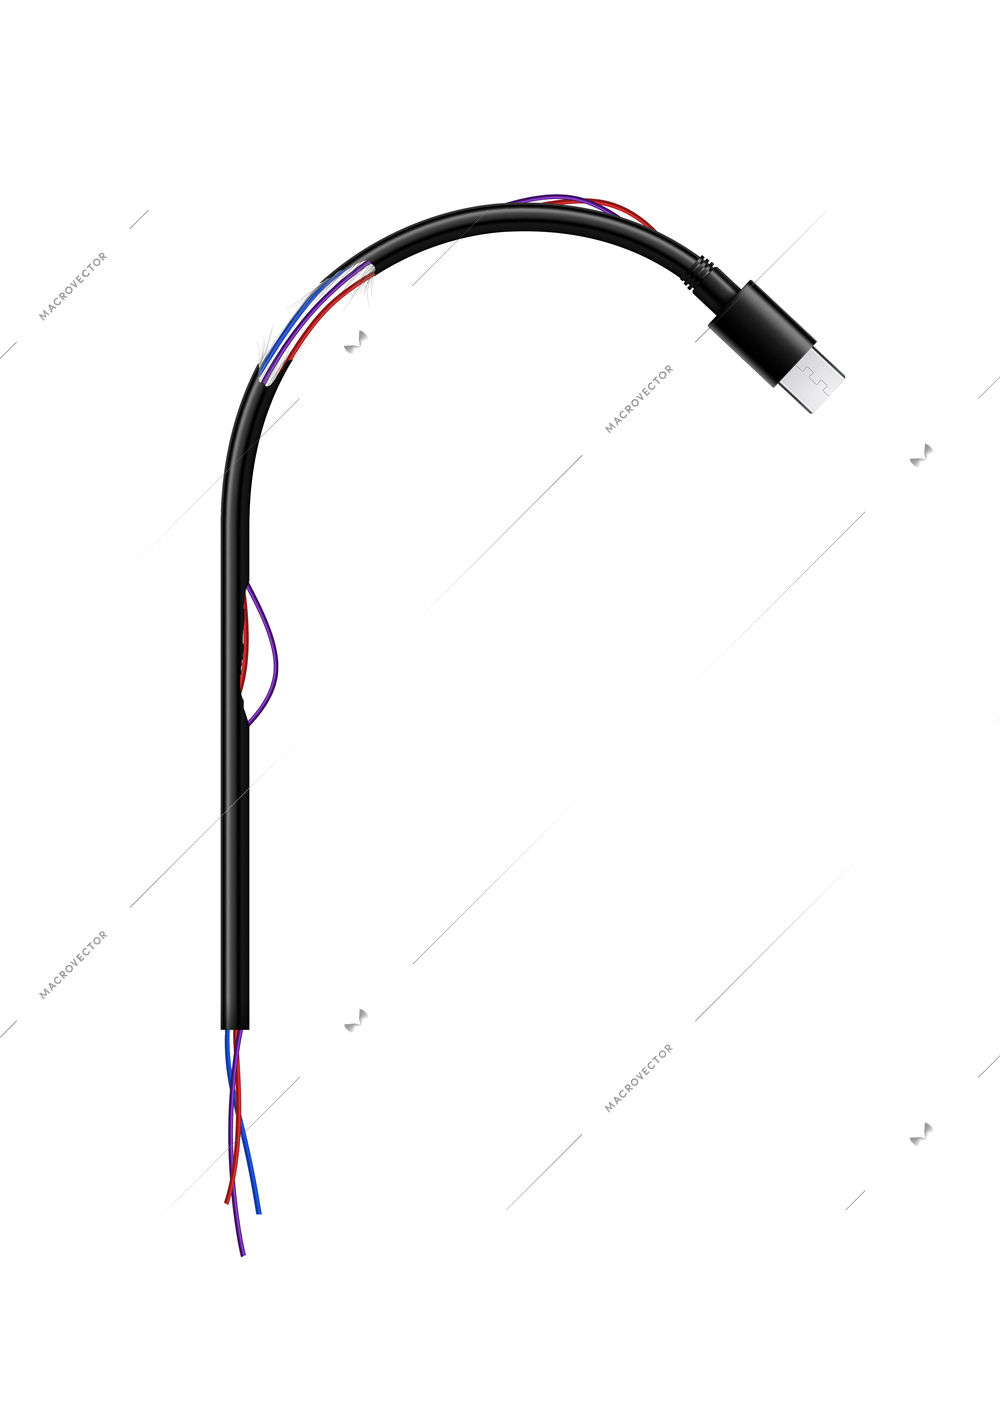 Realistic broken usb cable with naked wires vector illustration